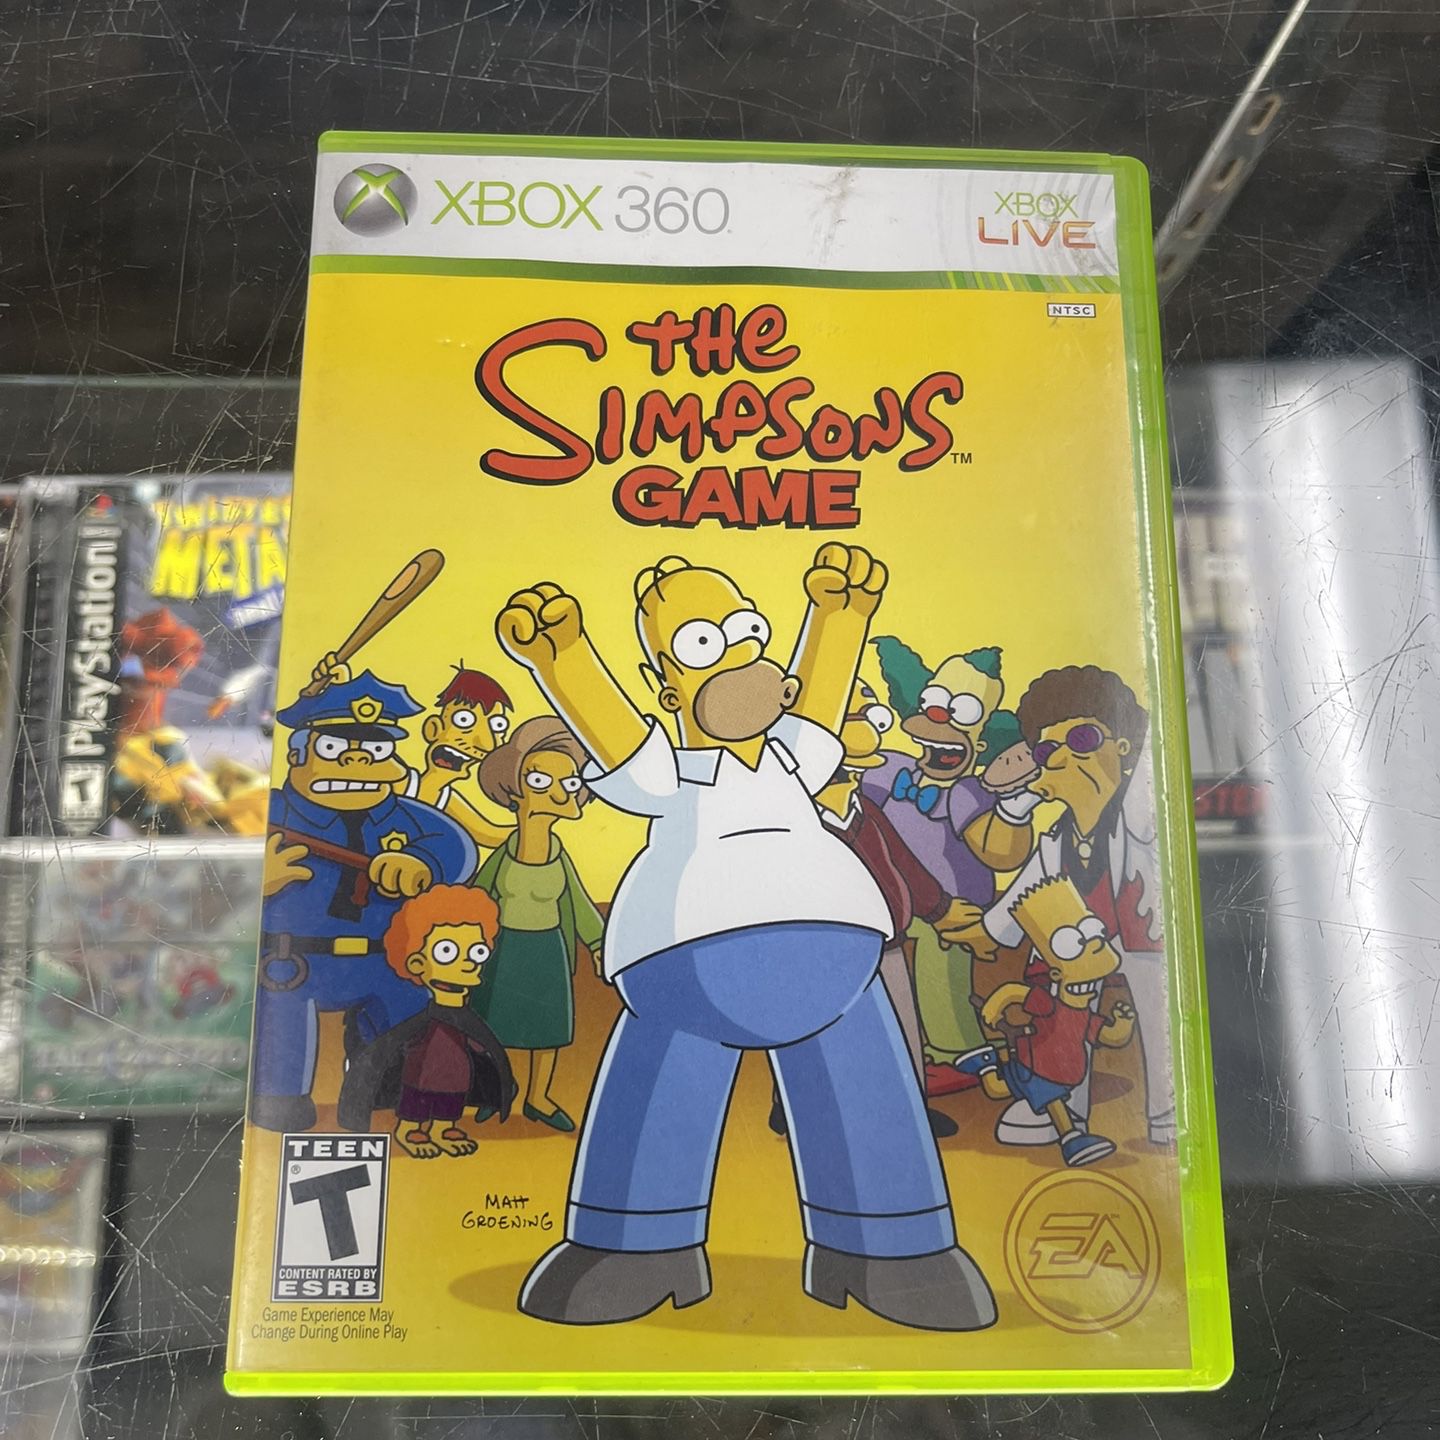 The Simpsons Game Xbox 360 $80 Gamehogs 11am-7pm